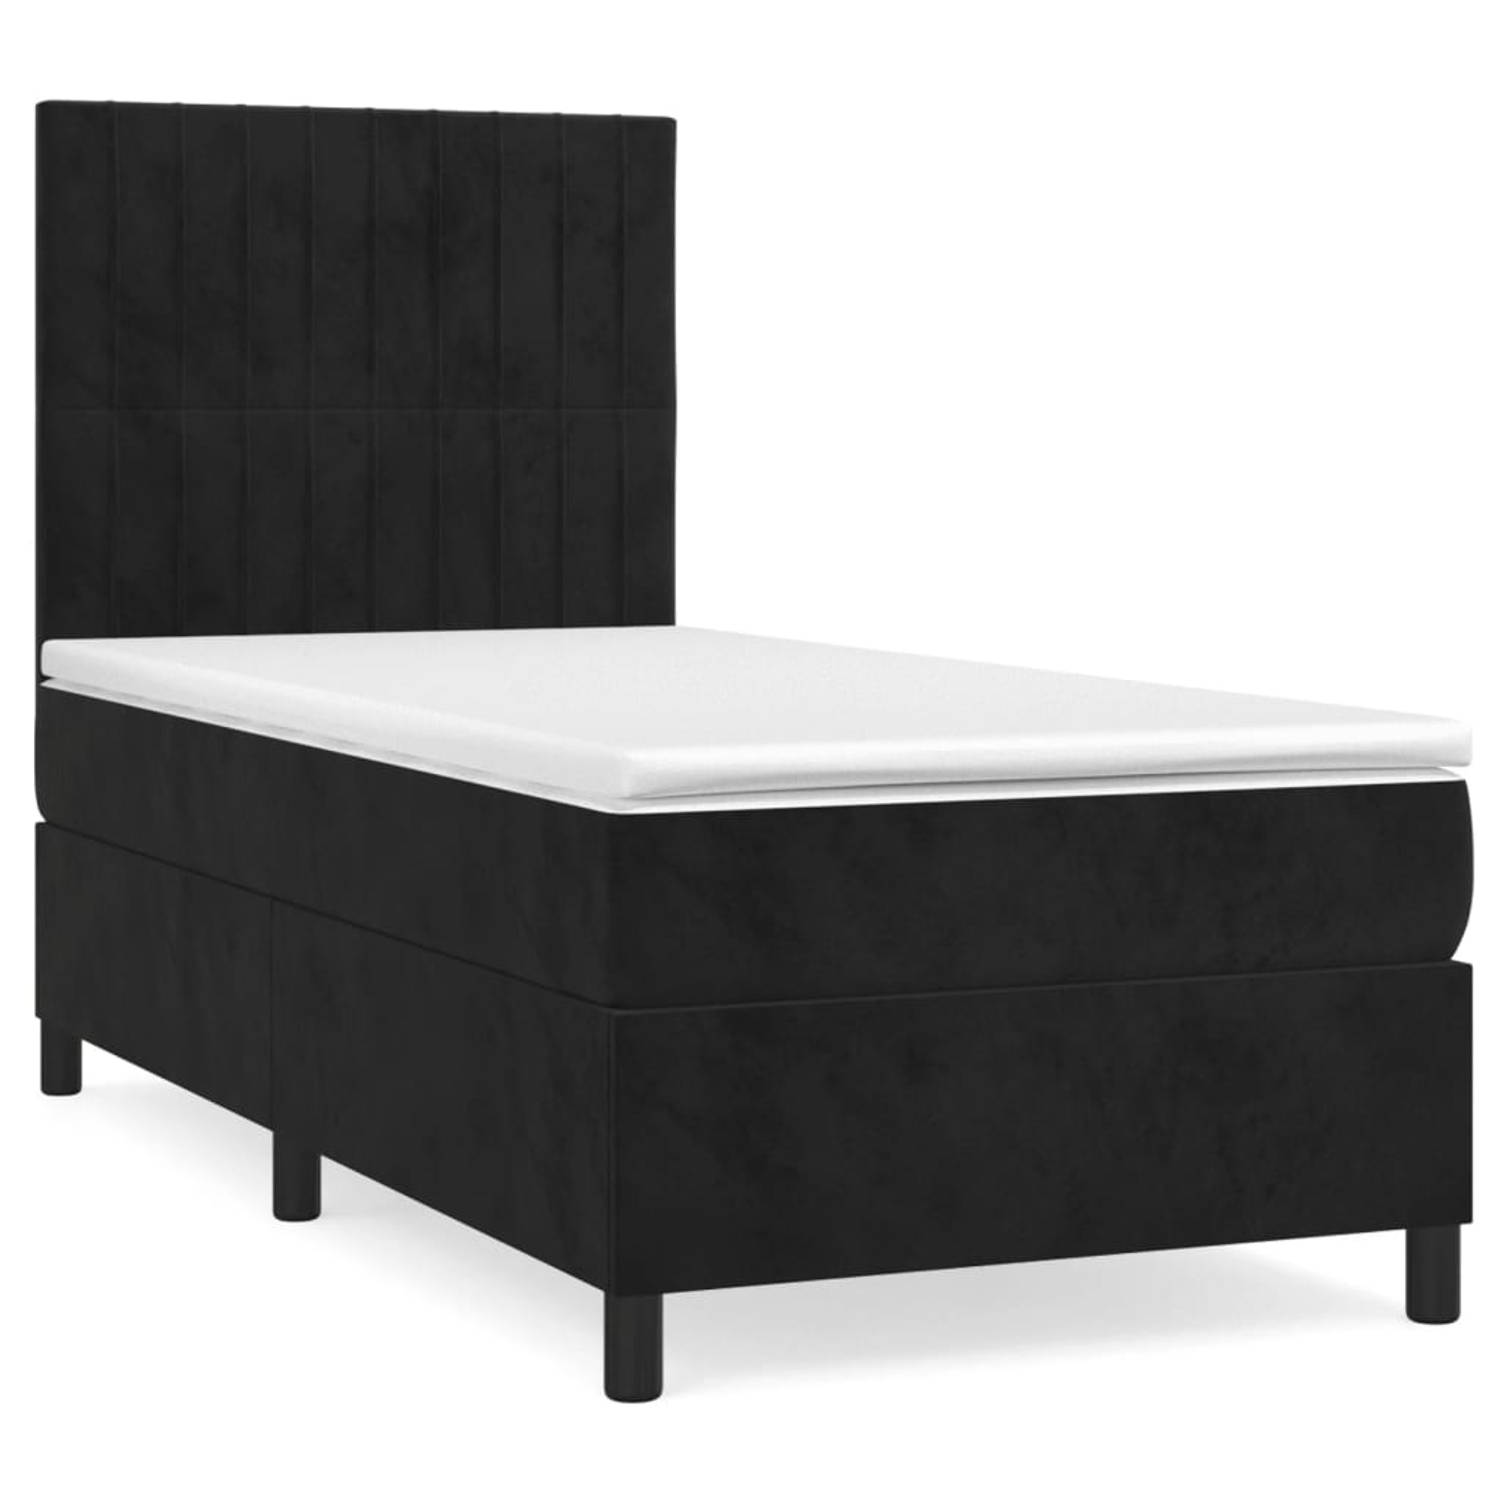 The Living Store Boxspringbed - The Living Store - Bed - 203 x 90 x 118/128 cm - Zwart